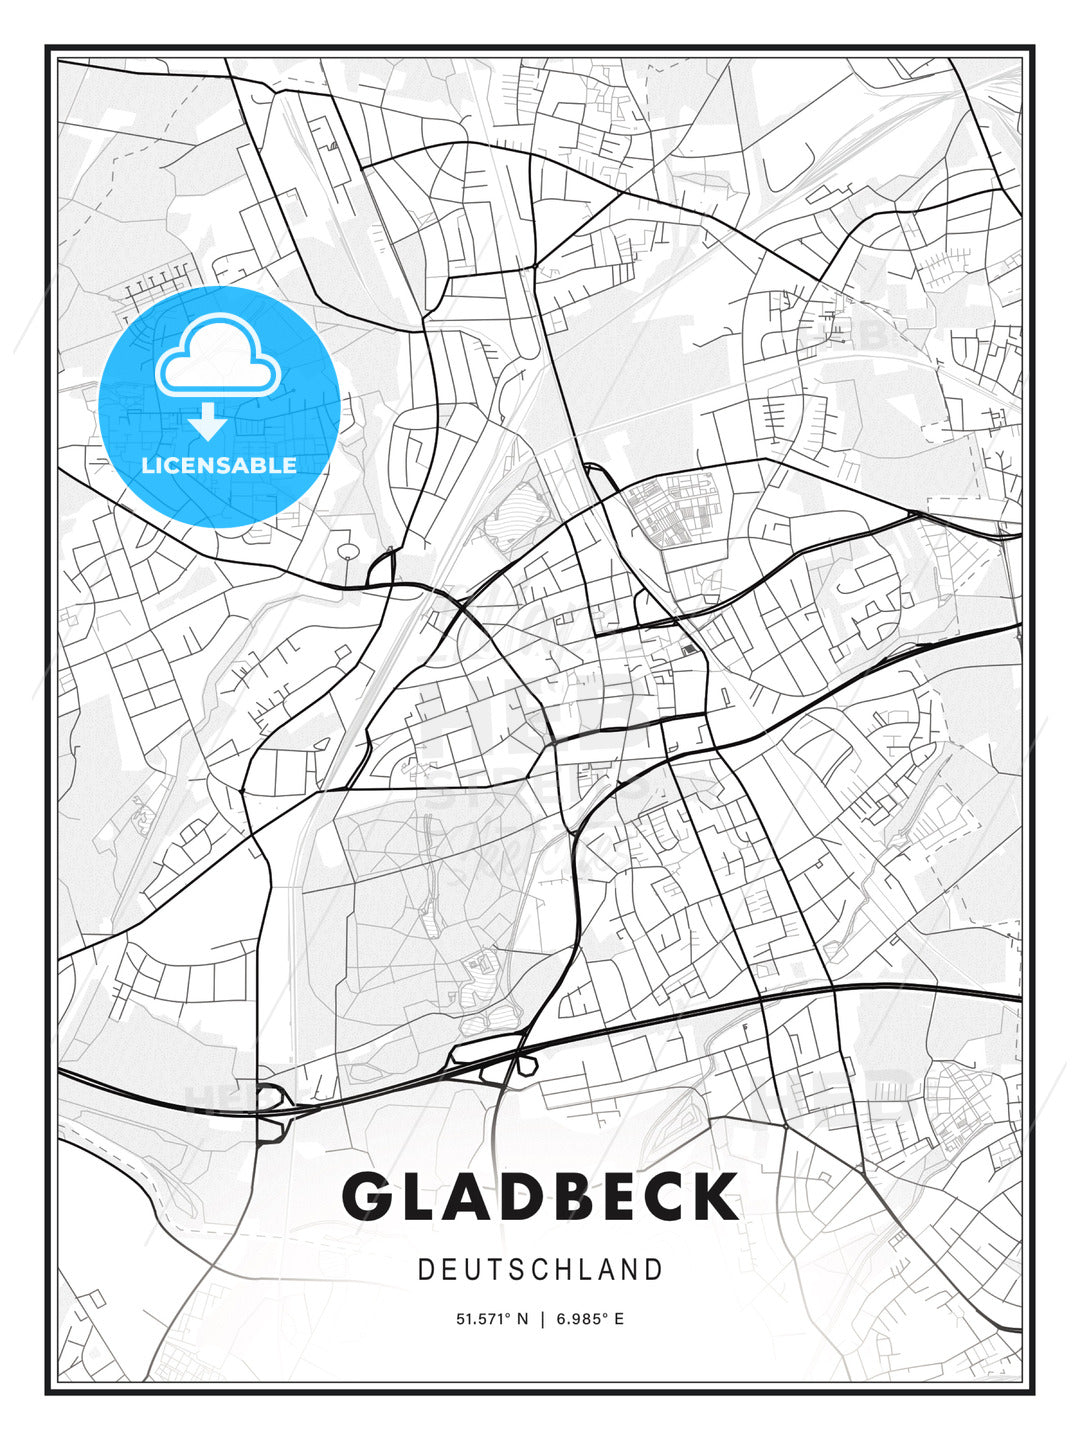 Gladbeck, Germany, Modern Print Template in Various Formats - HEBSTREITS Sketches